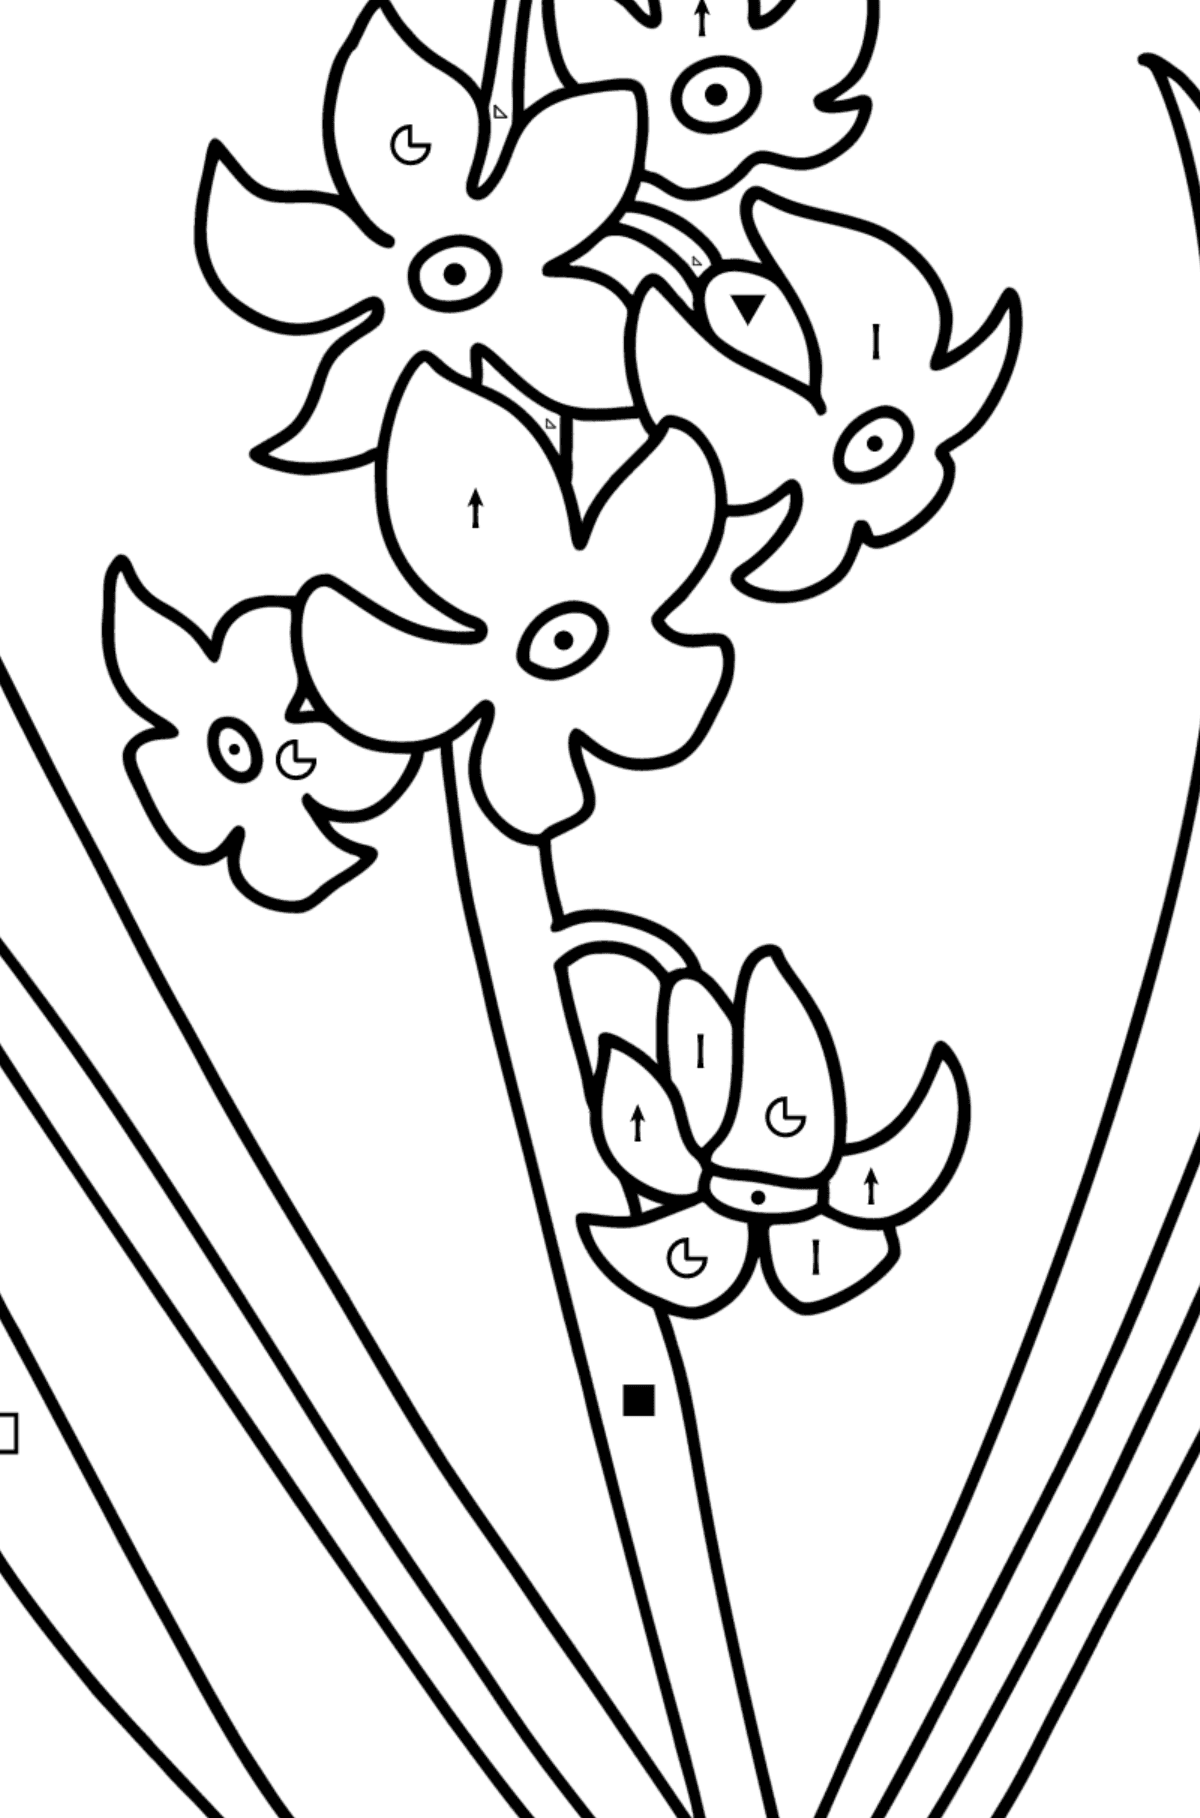 Hyacinth coloring page - Coloring by Symbols and Geometric Shapes for Kids